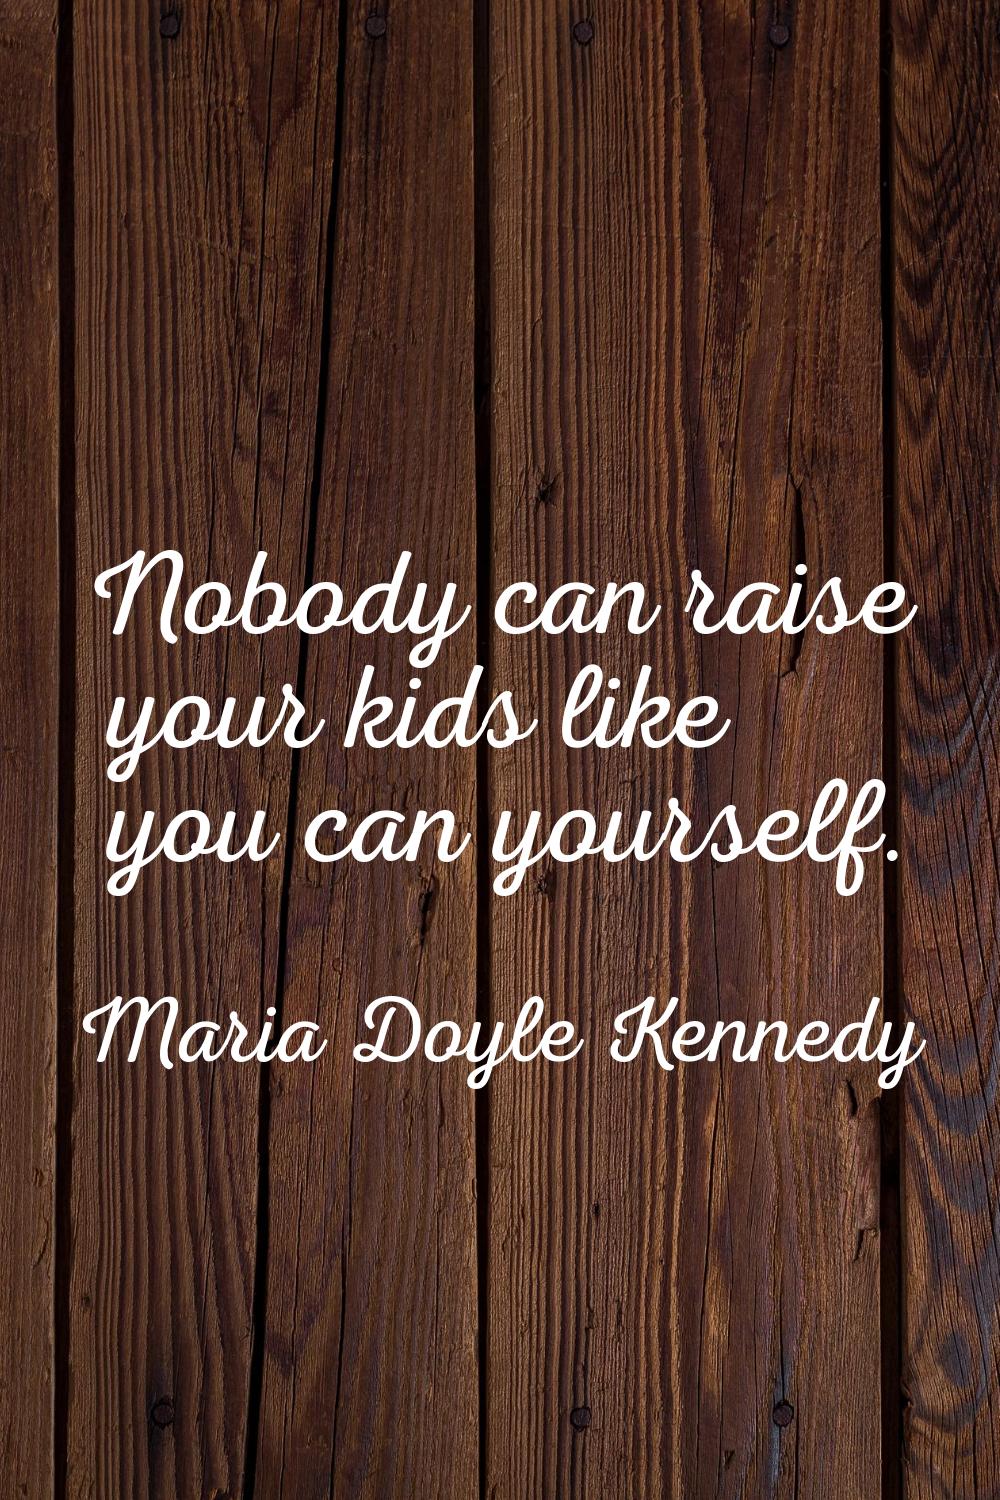 Nobody can raise your kids like you can yourself.